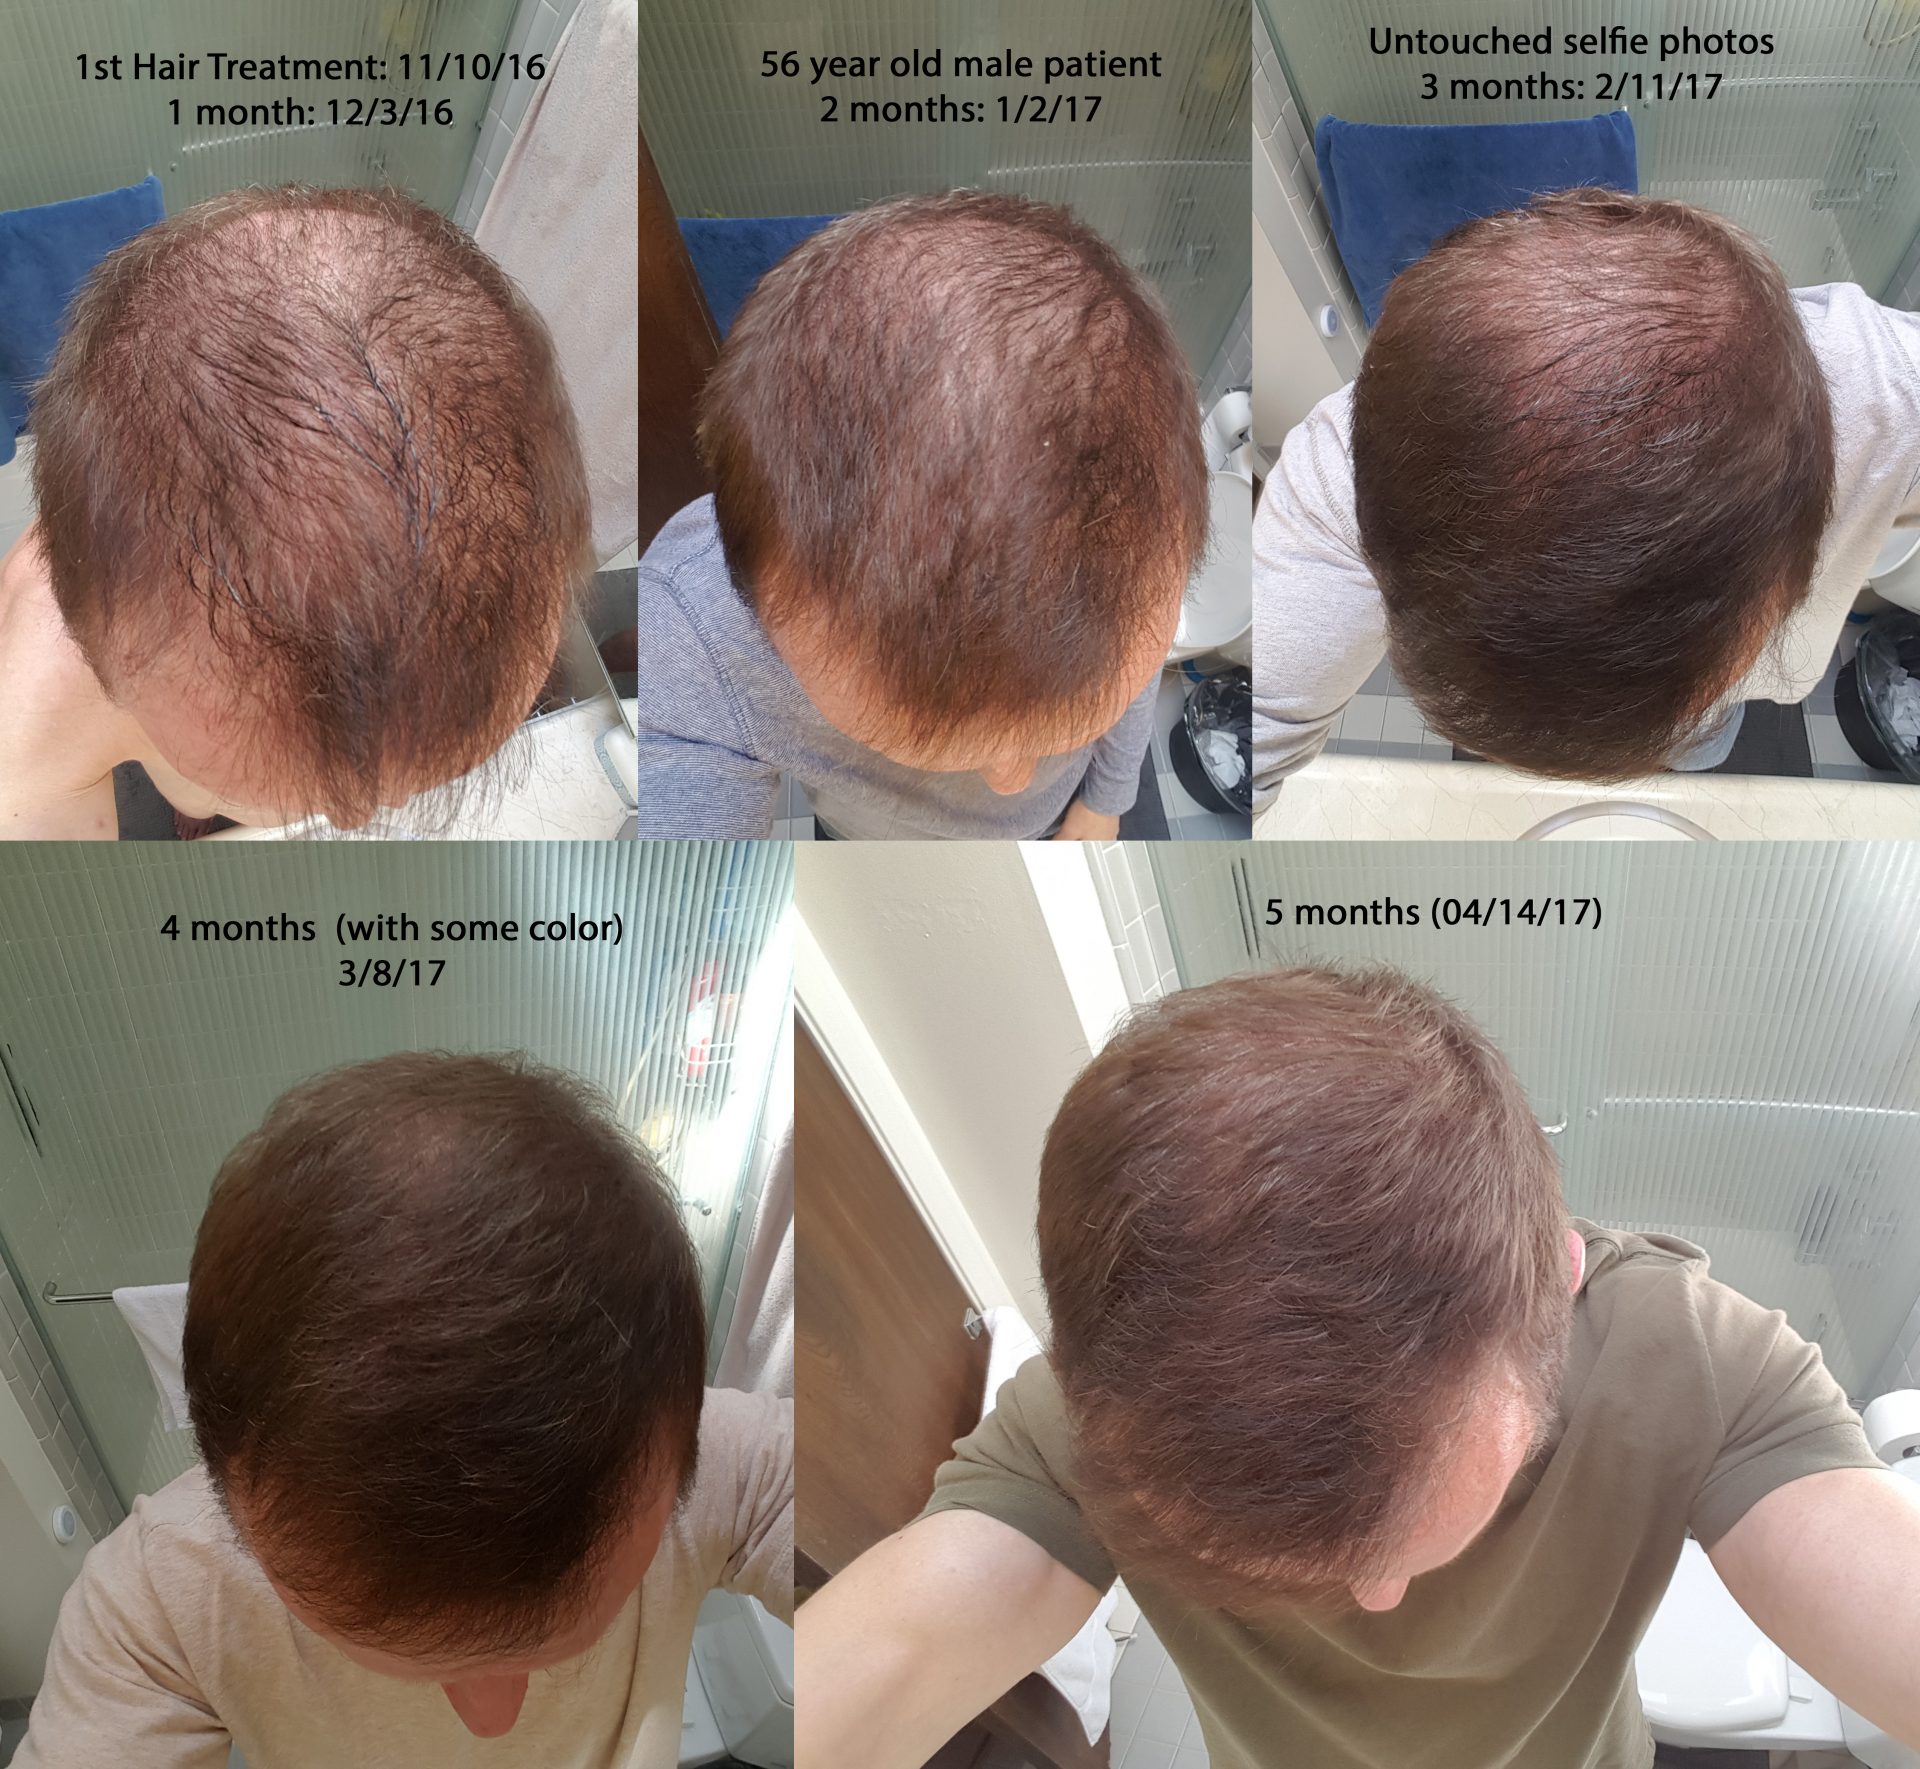 ACell + PRP Hair Regrowth Therapy - Serenity MedSpa